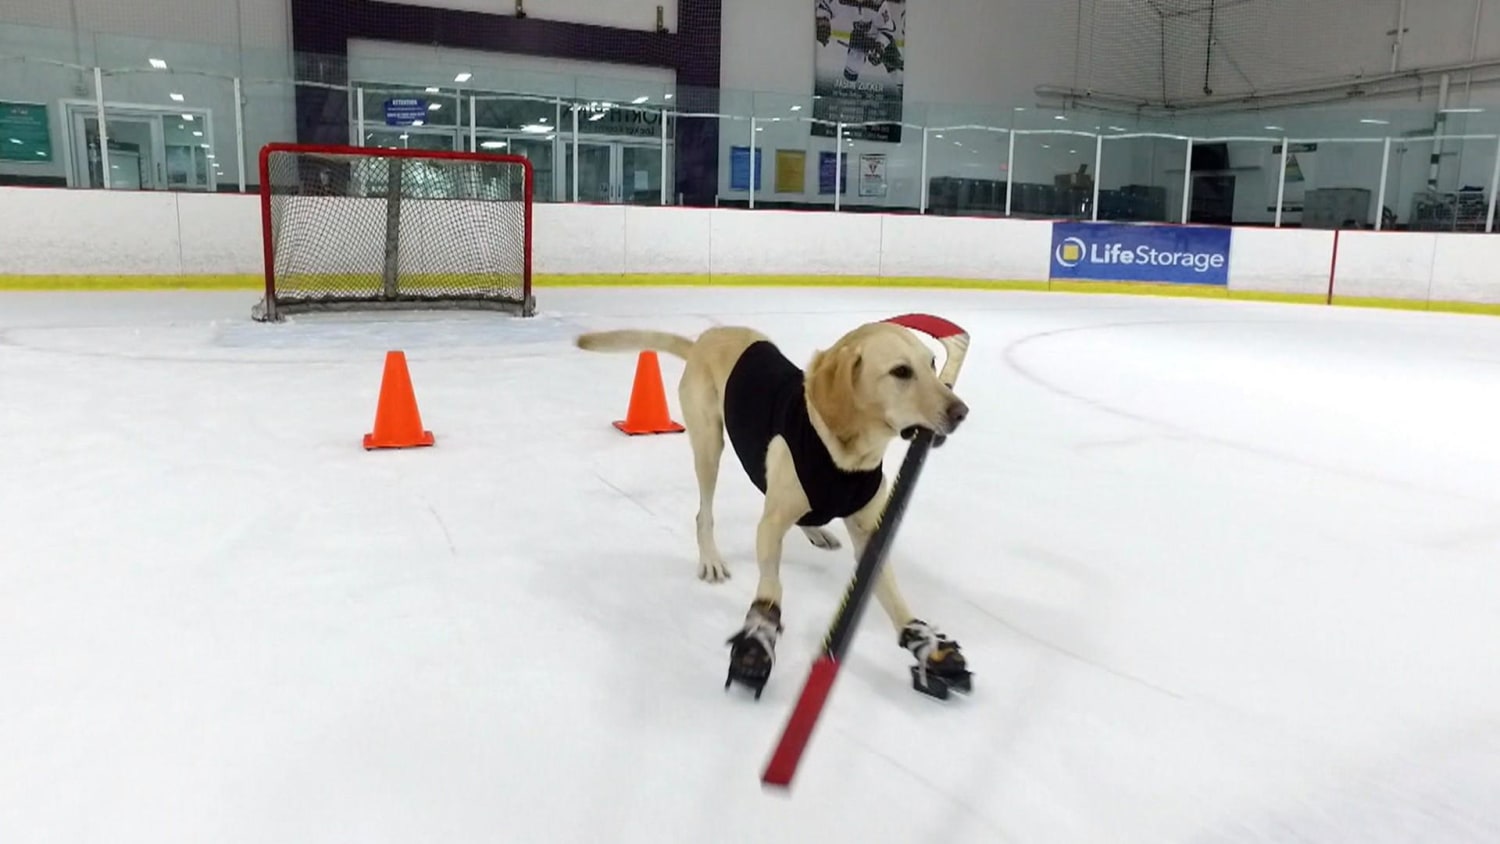 Video Dog plays hockey with owner on ice - ABC News